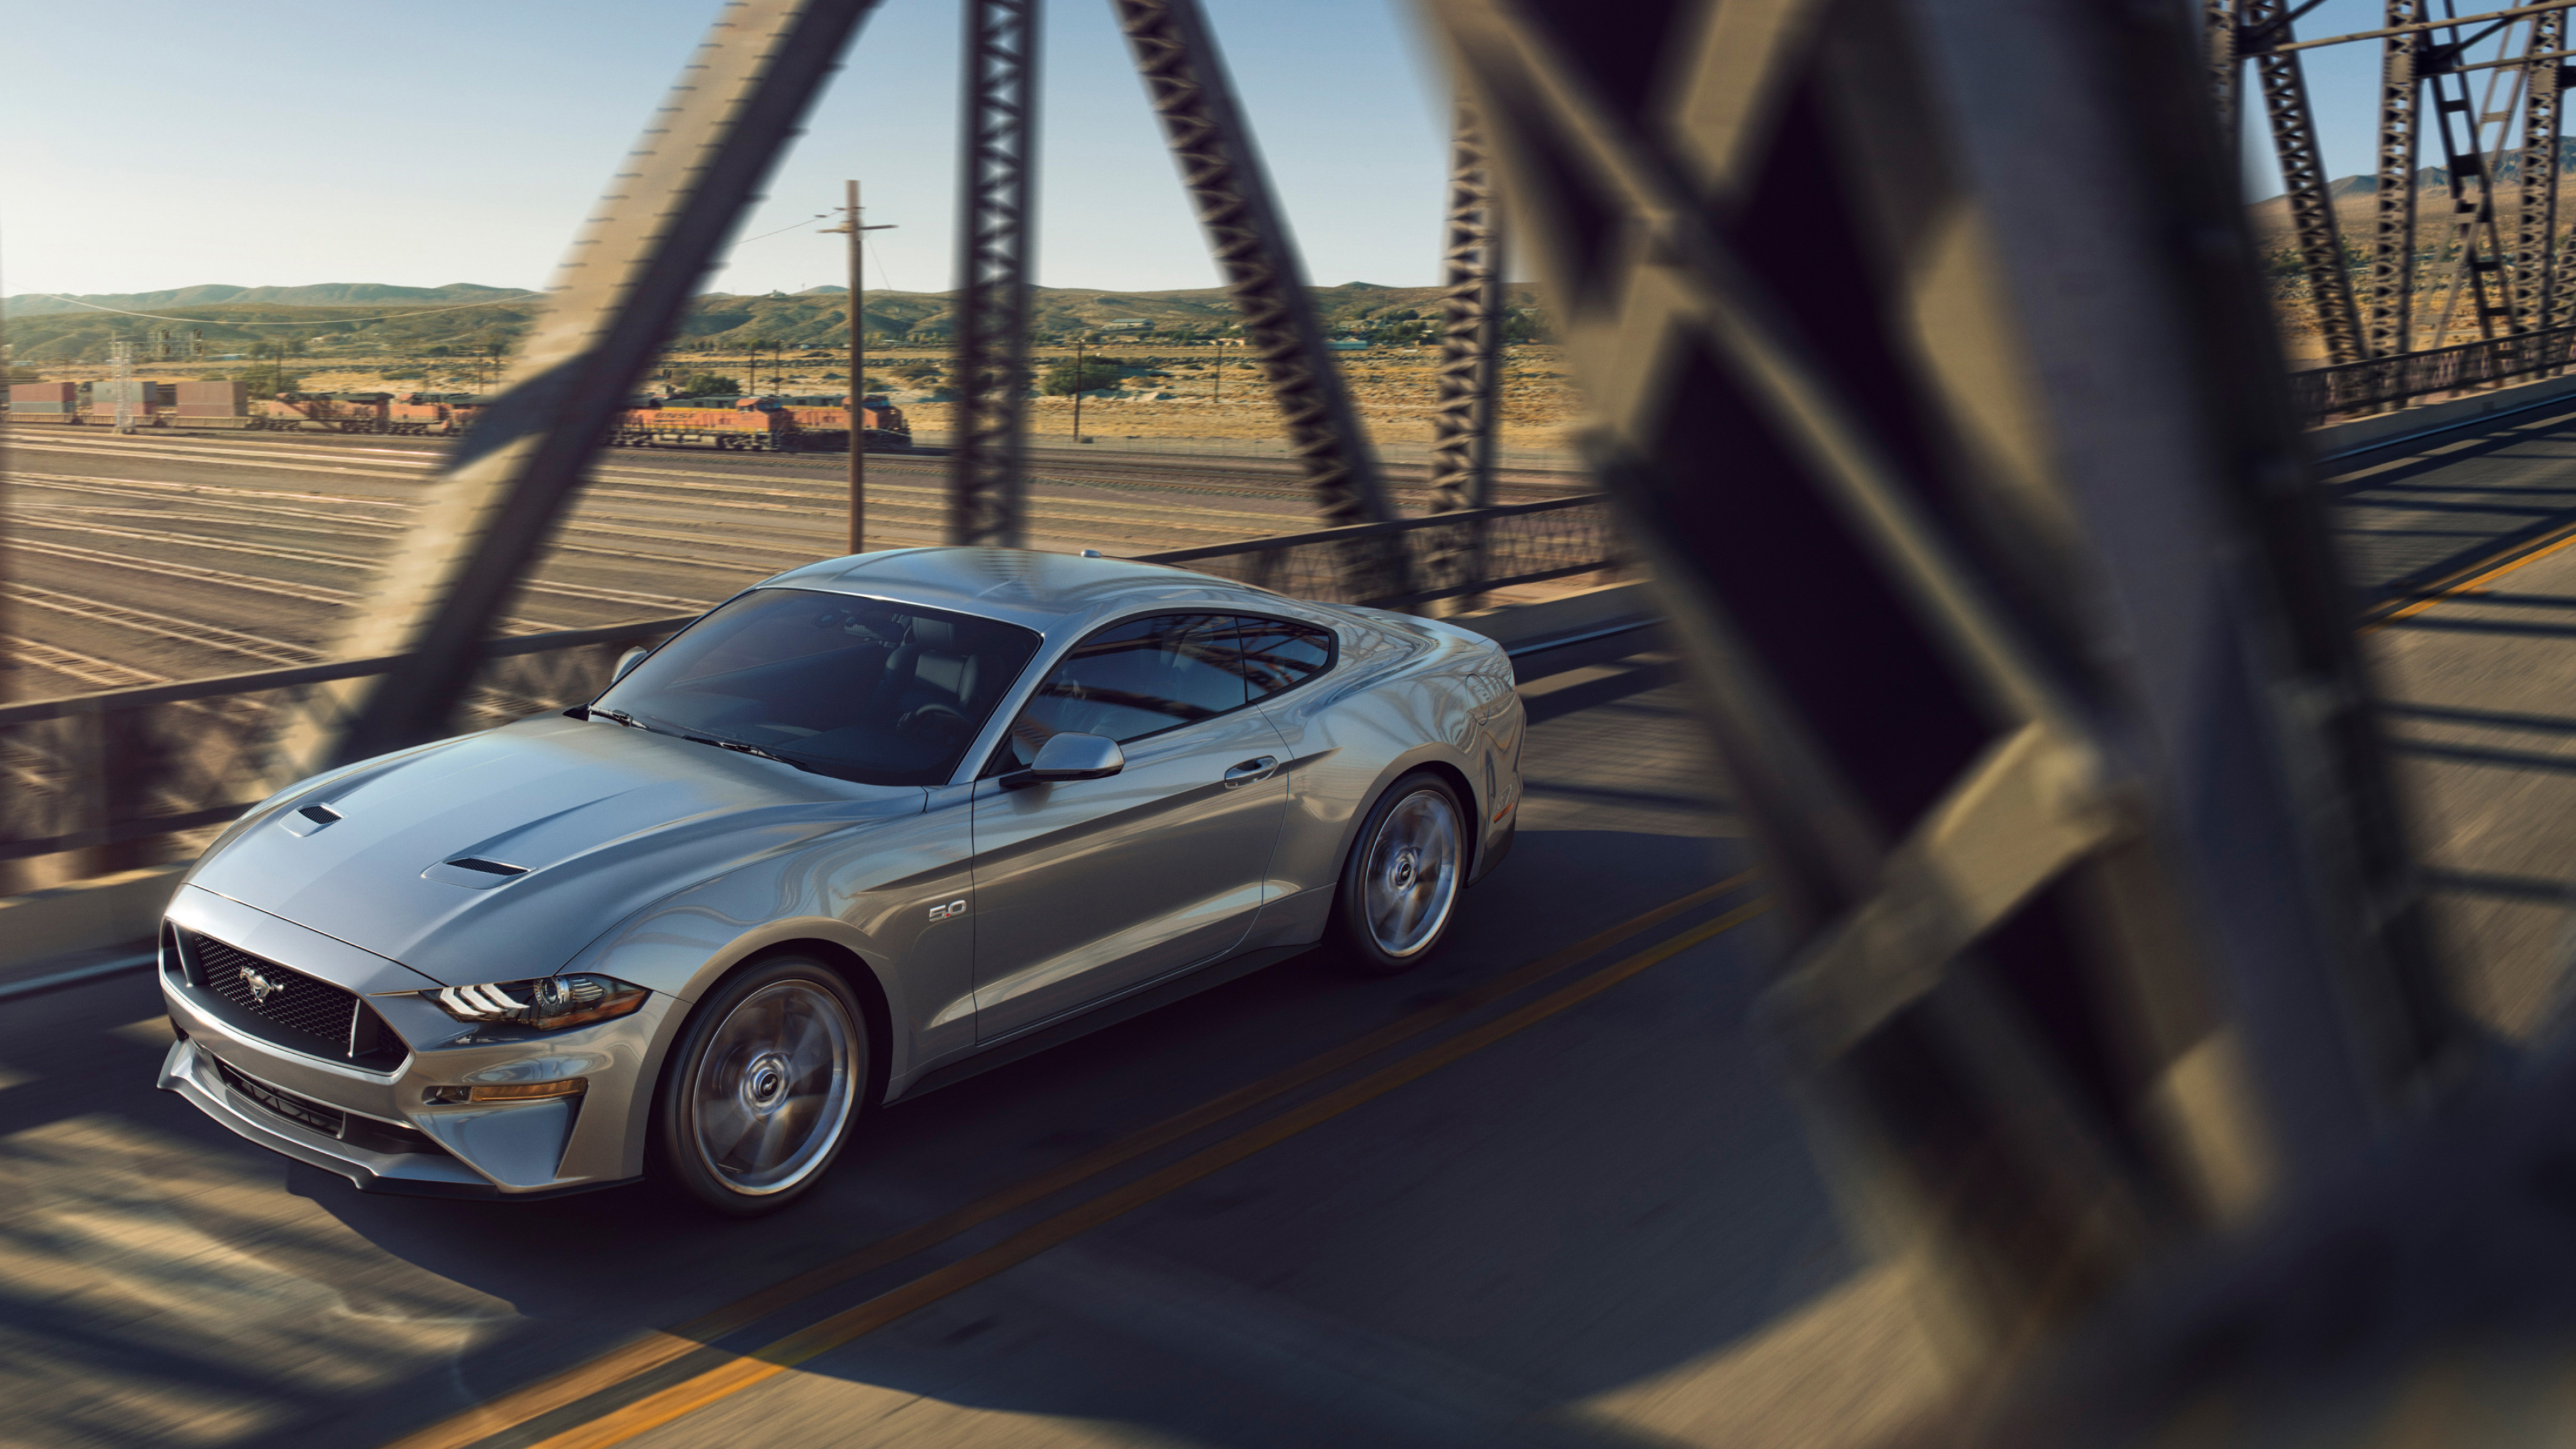 Ford Mustang: The world's best-selling sports car since its release in 1964. 3840x2160 4K Background.